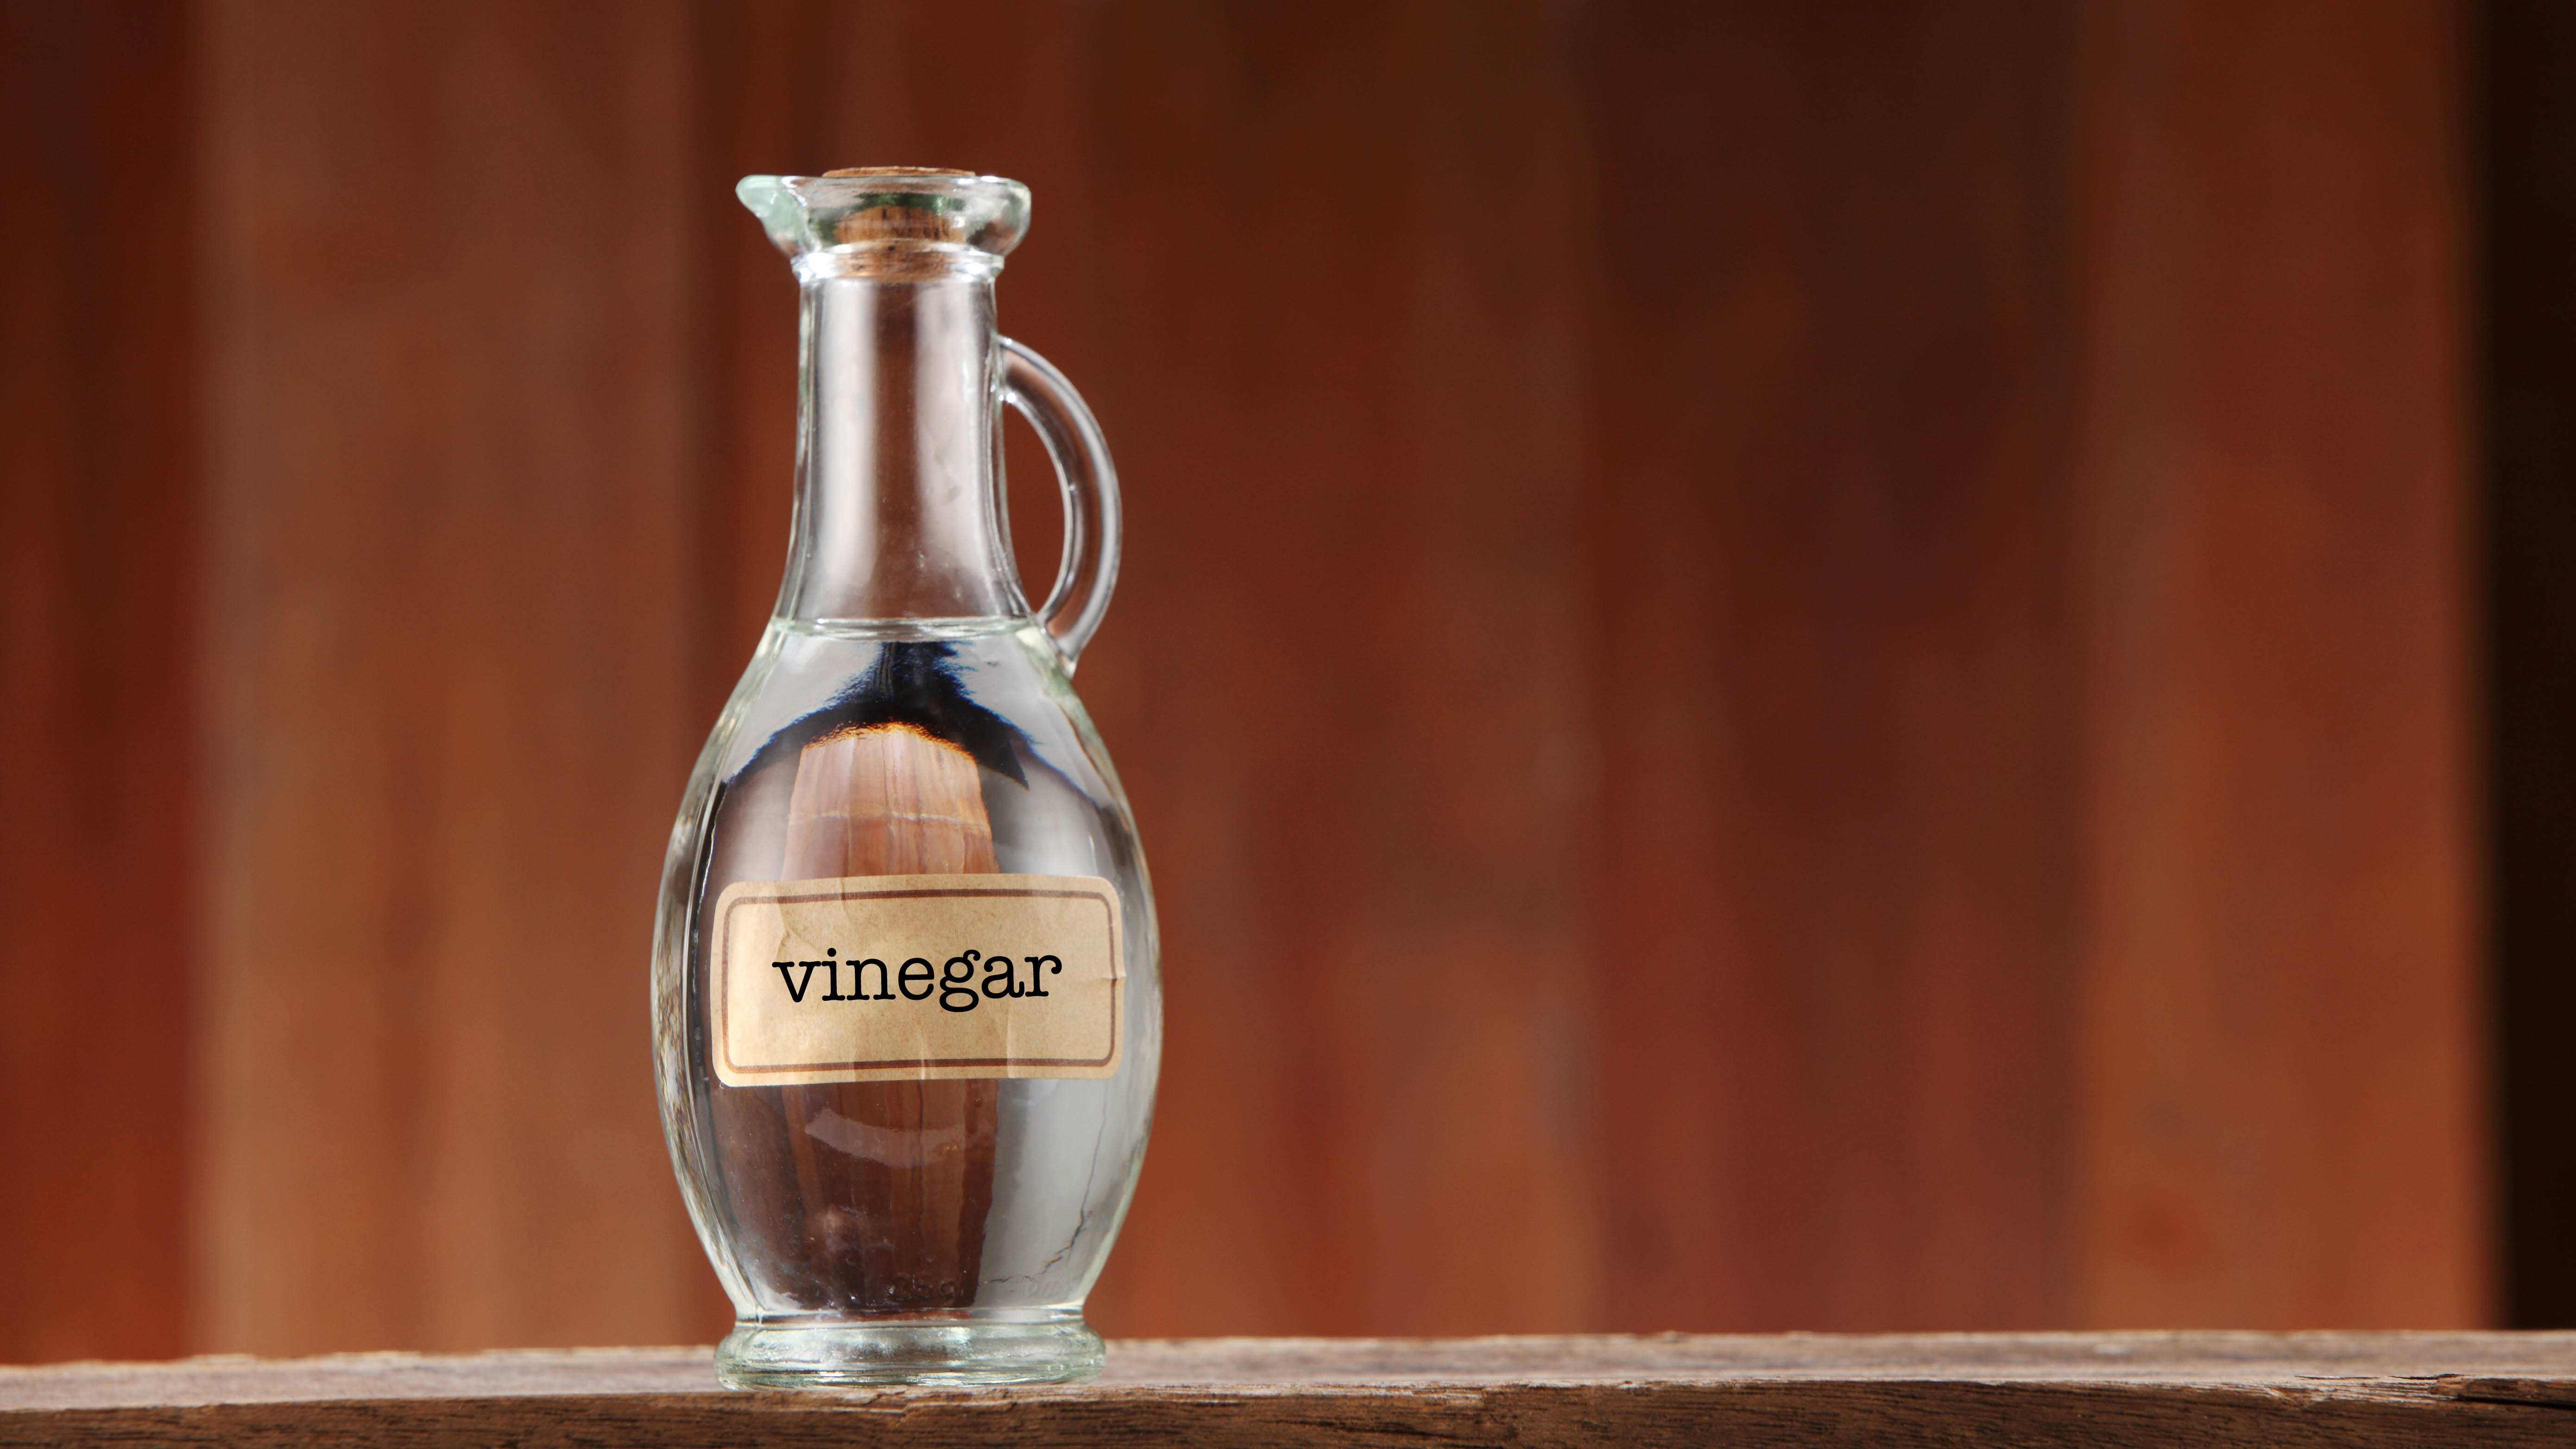 A glass jar filled with white vinegar.